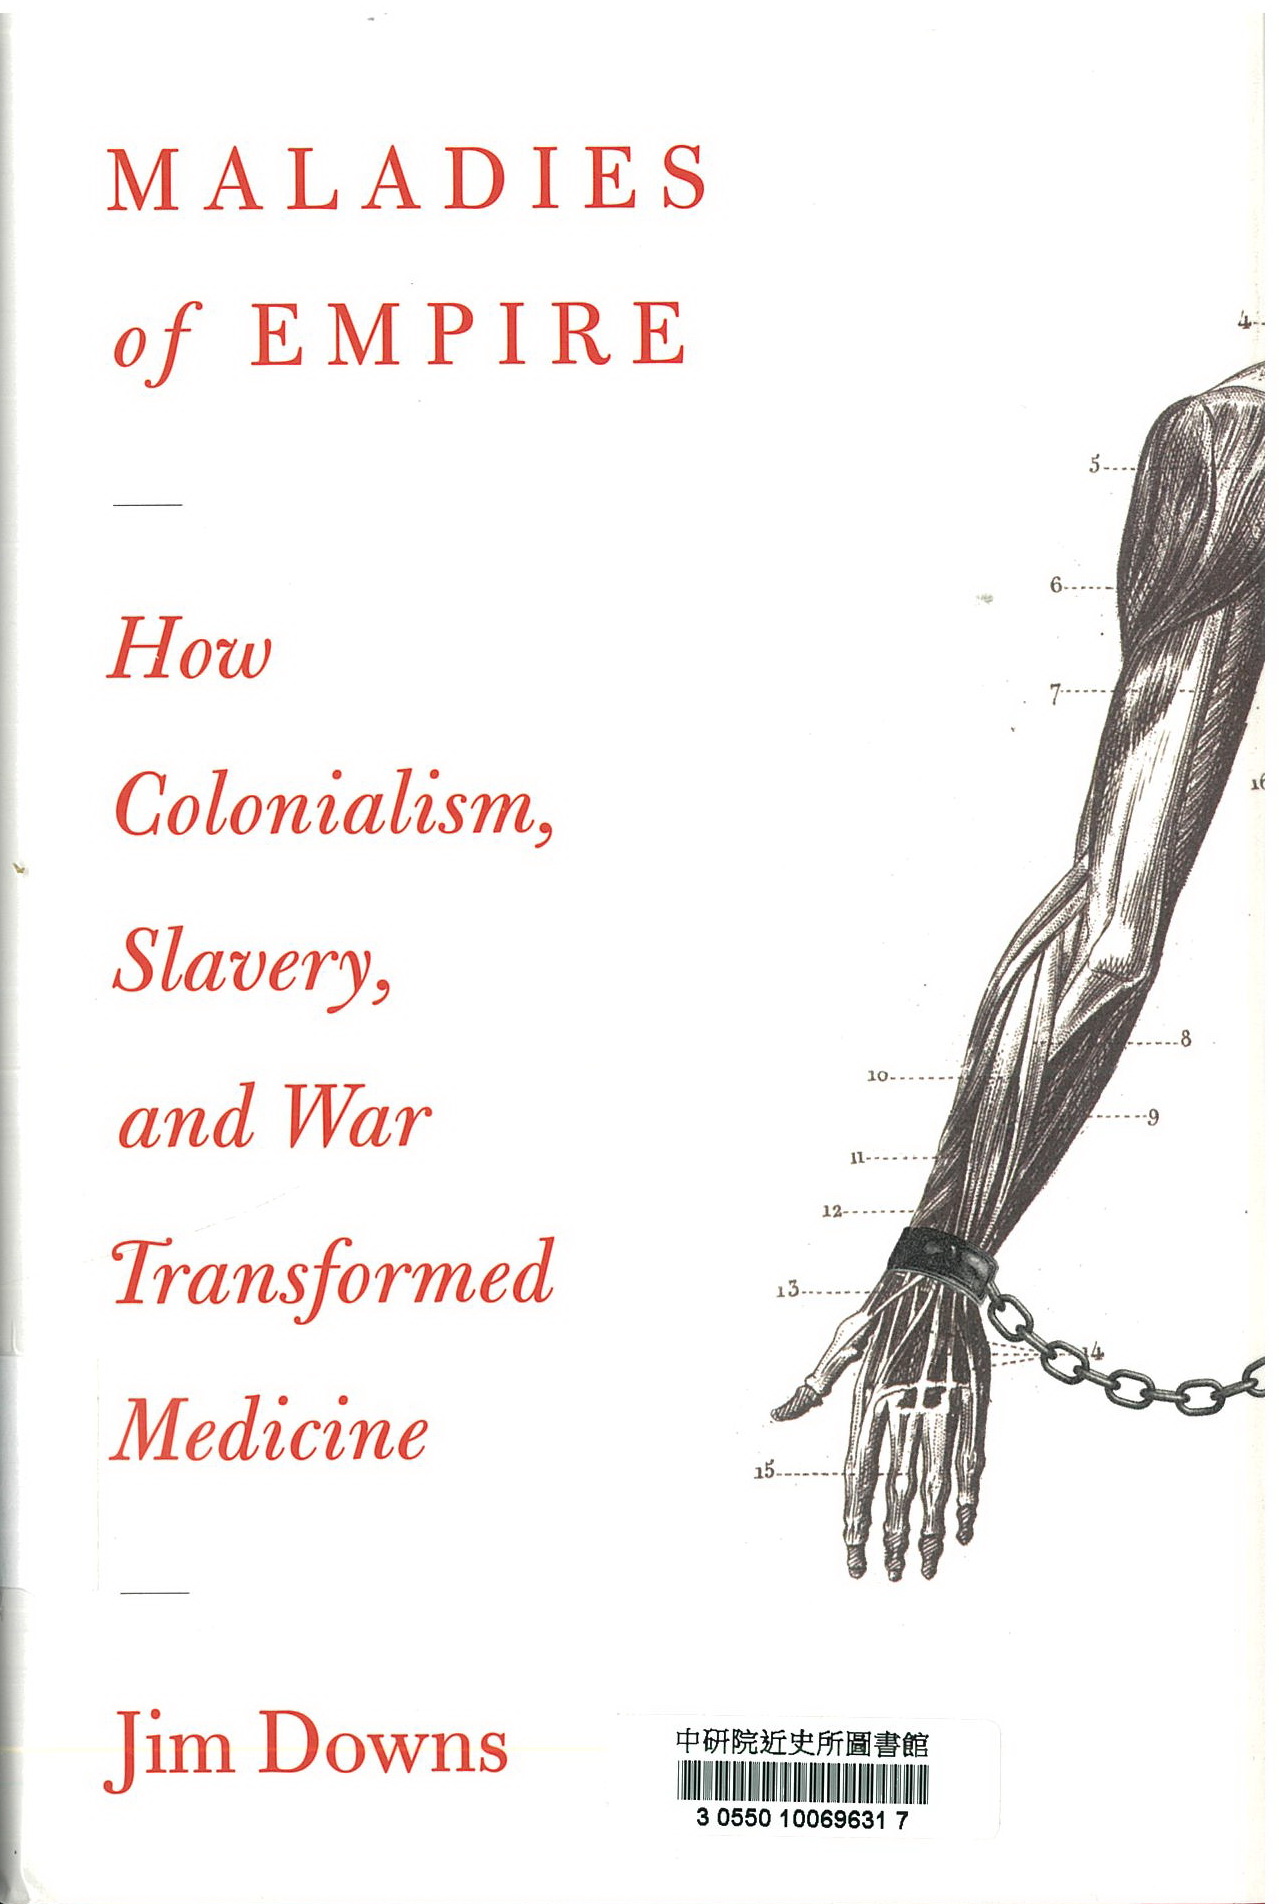 Maladies of empire : how colonialism, slavery, and war transformed medicine